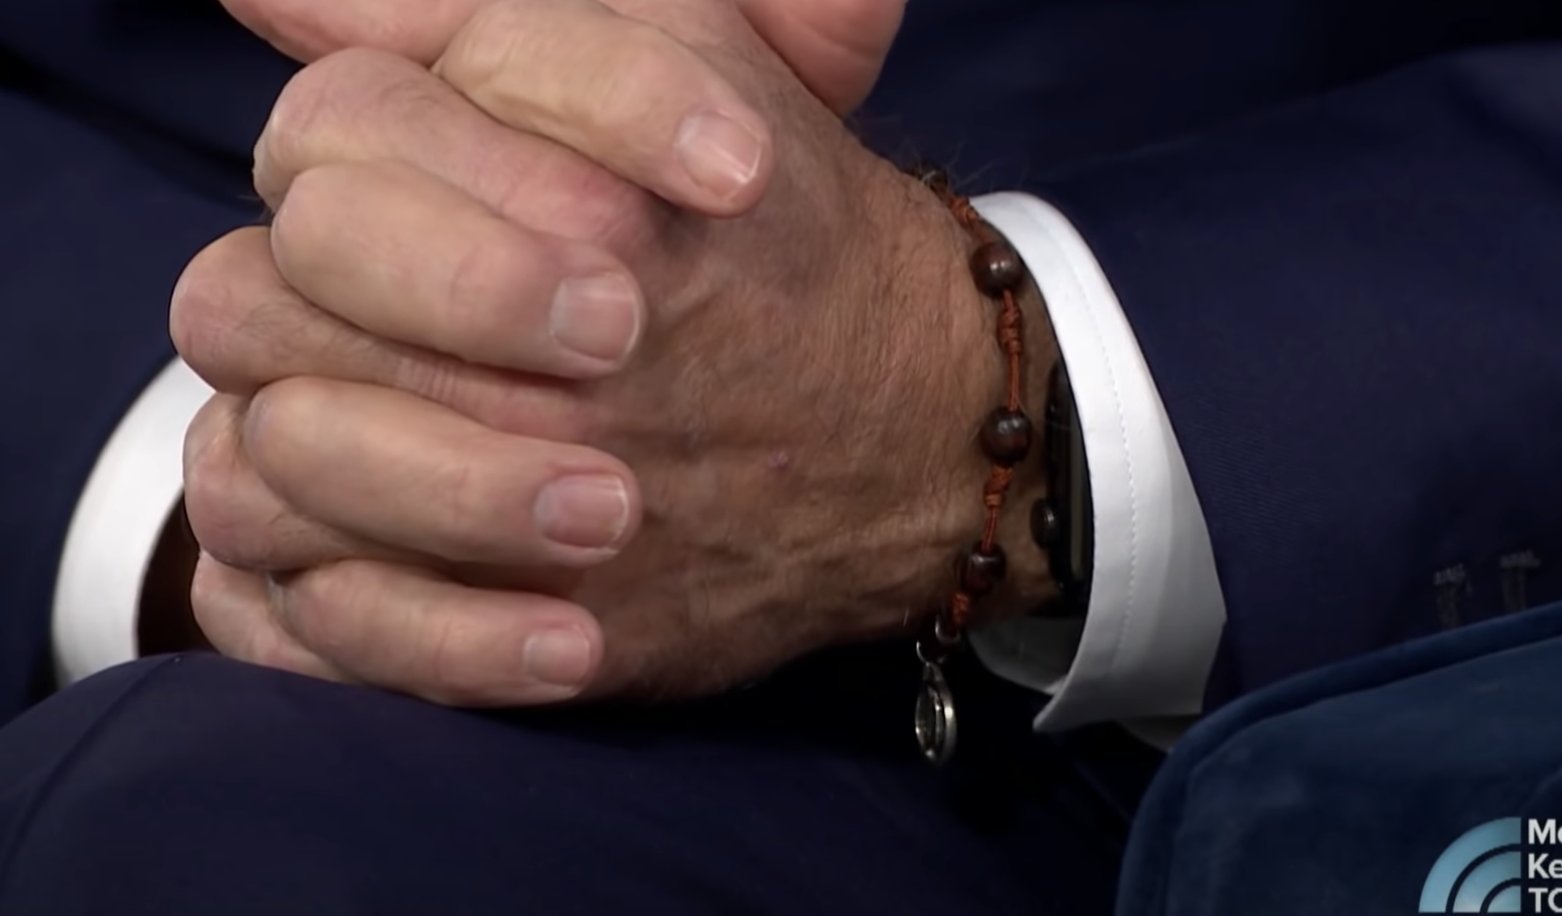 Was Joe Biden wearing a wire during last night’s debate? - Truly Times - Conservative News How To Wear A Rosary Around Your Wrist